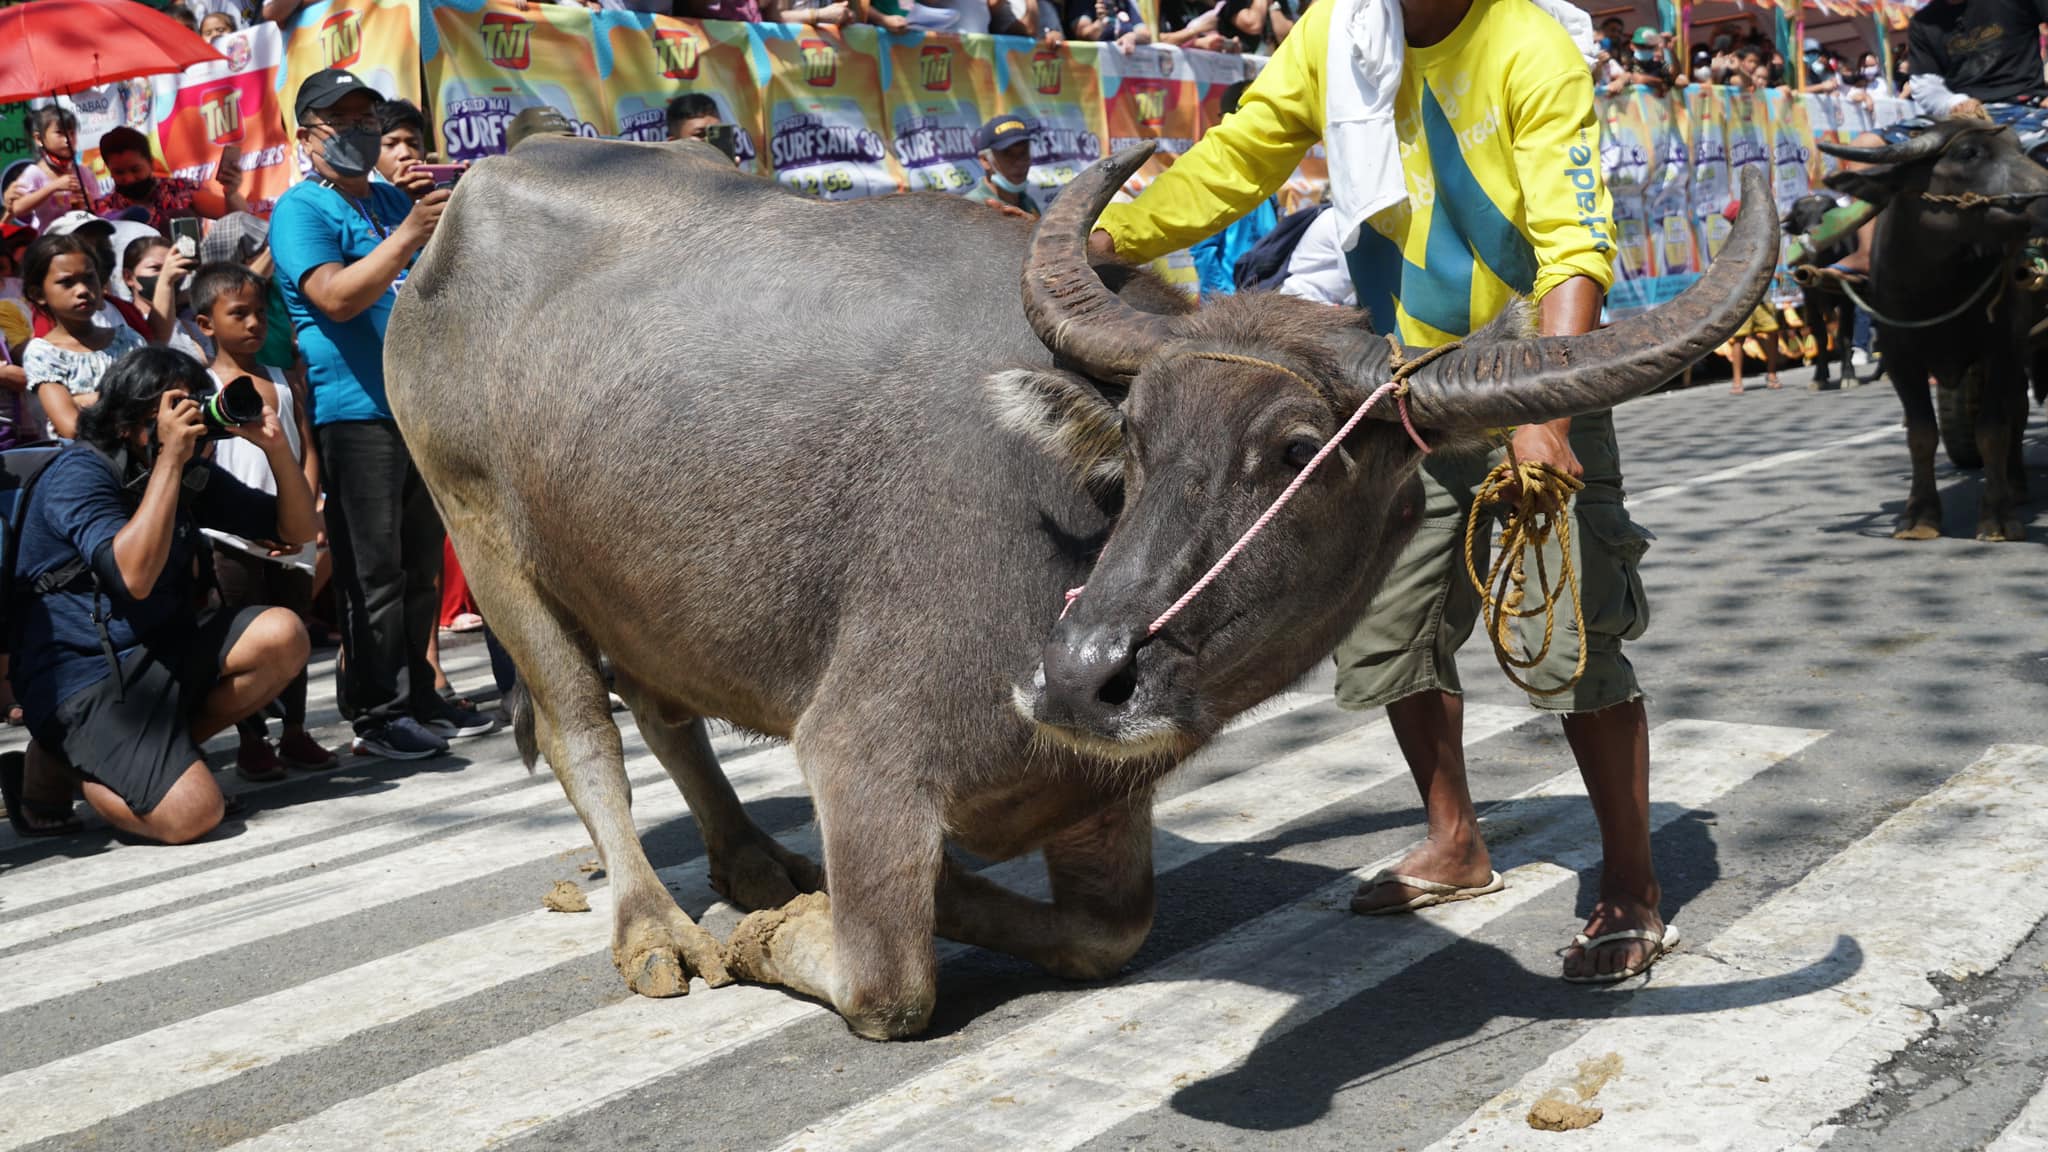 11 Facts About Pulilan Carabao Festival - Facts.net